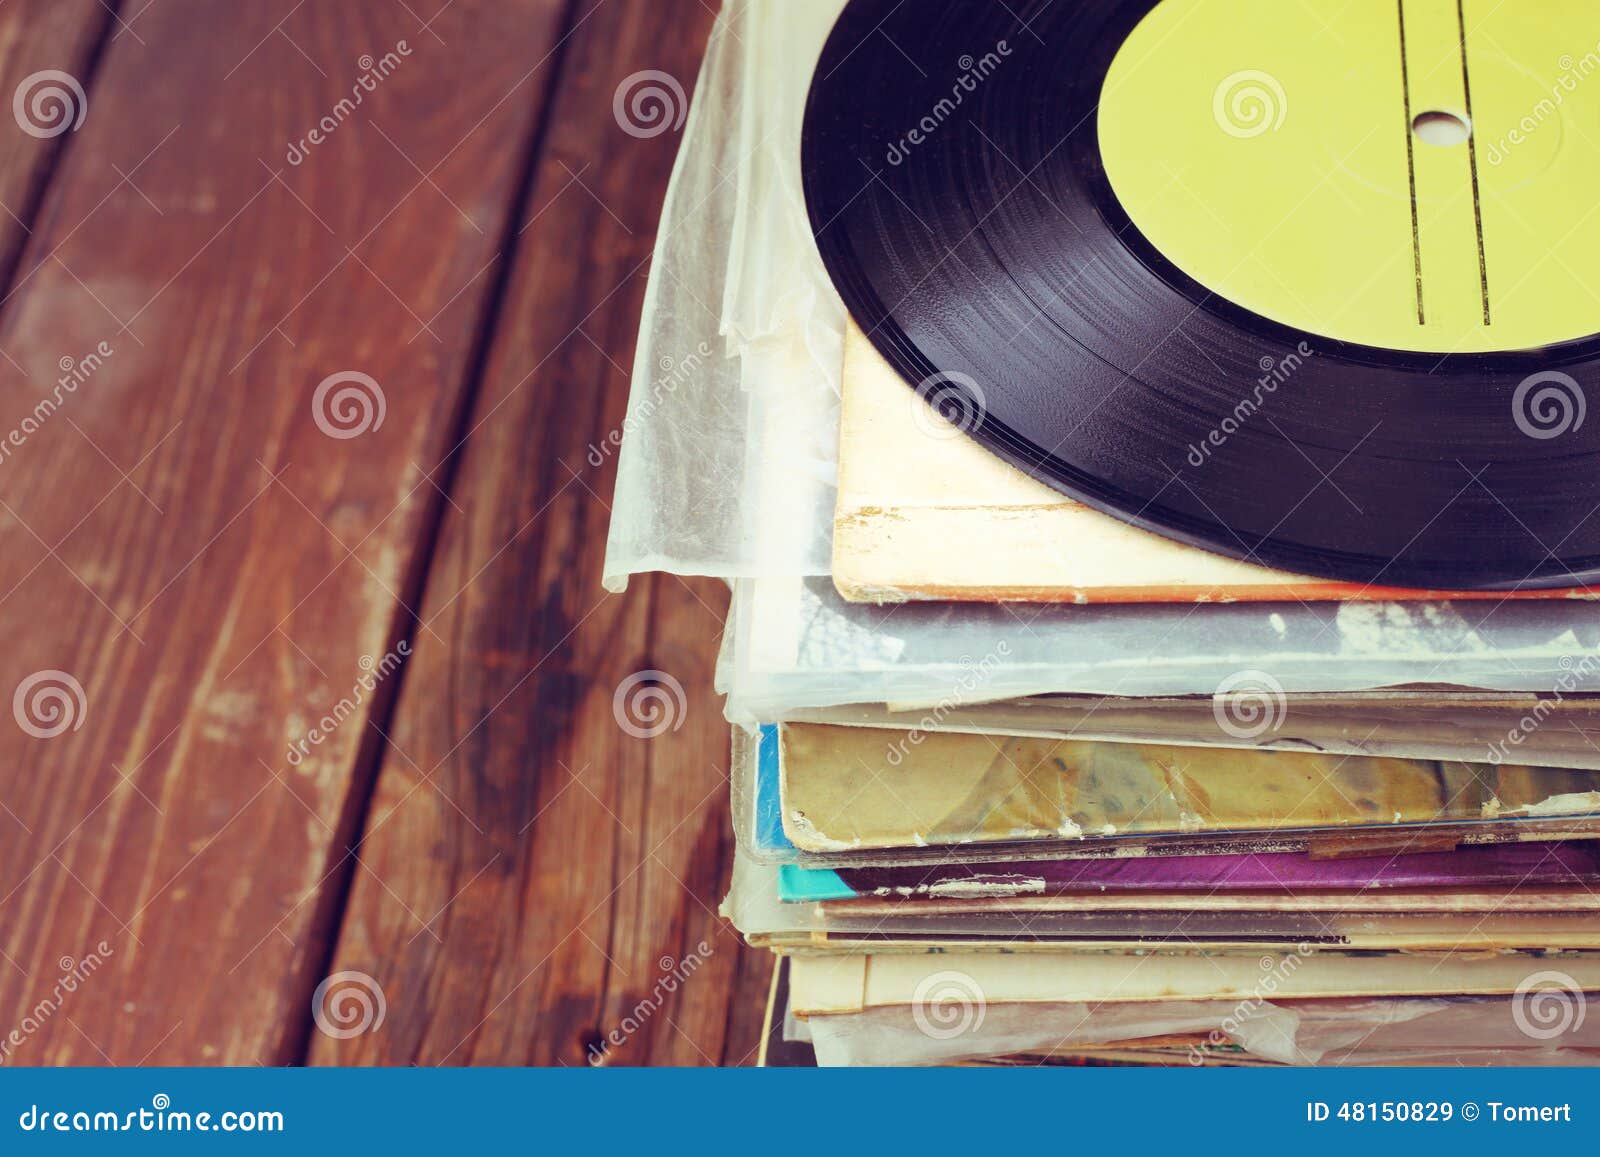 records stack and old record. vintage filtered